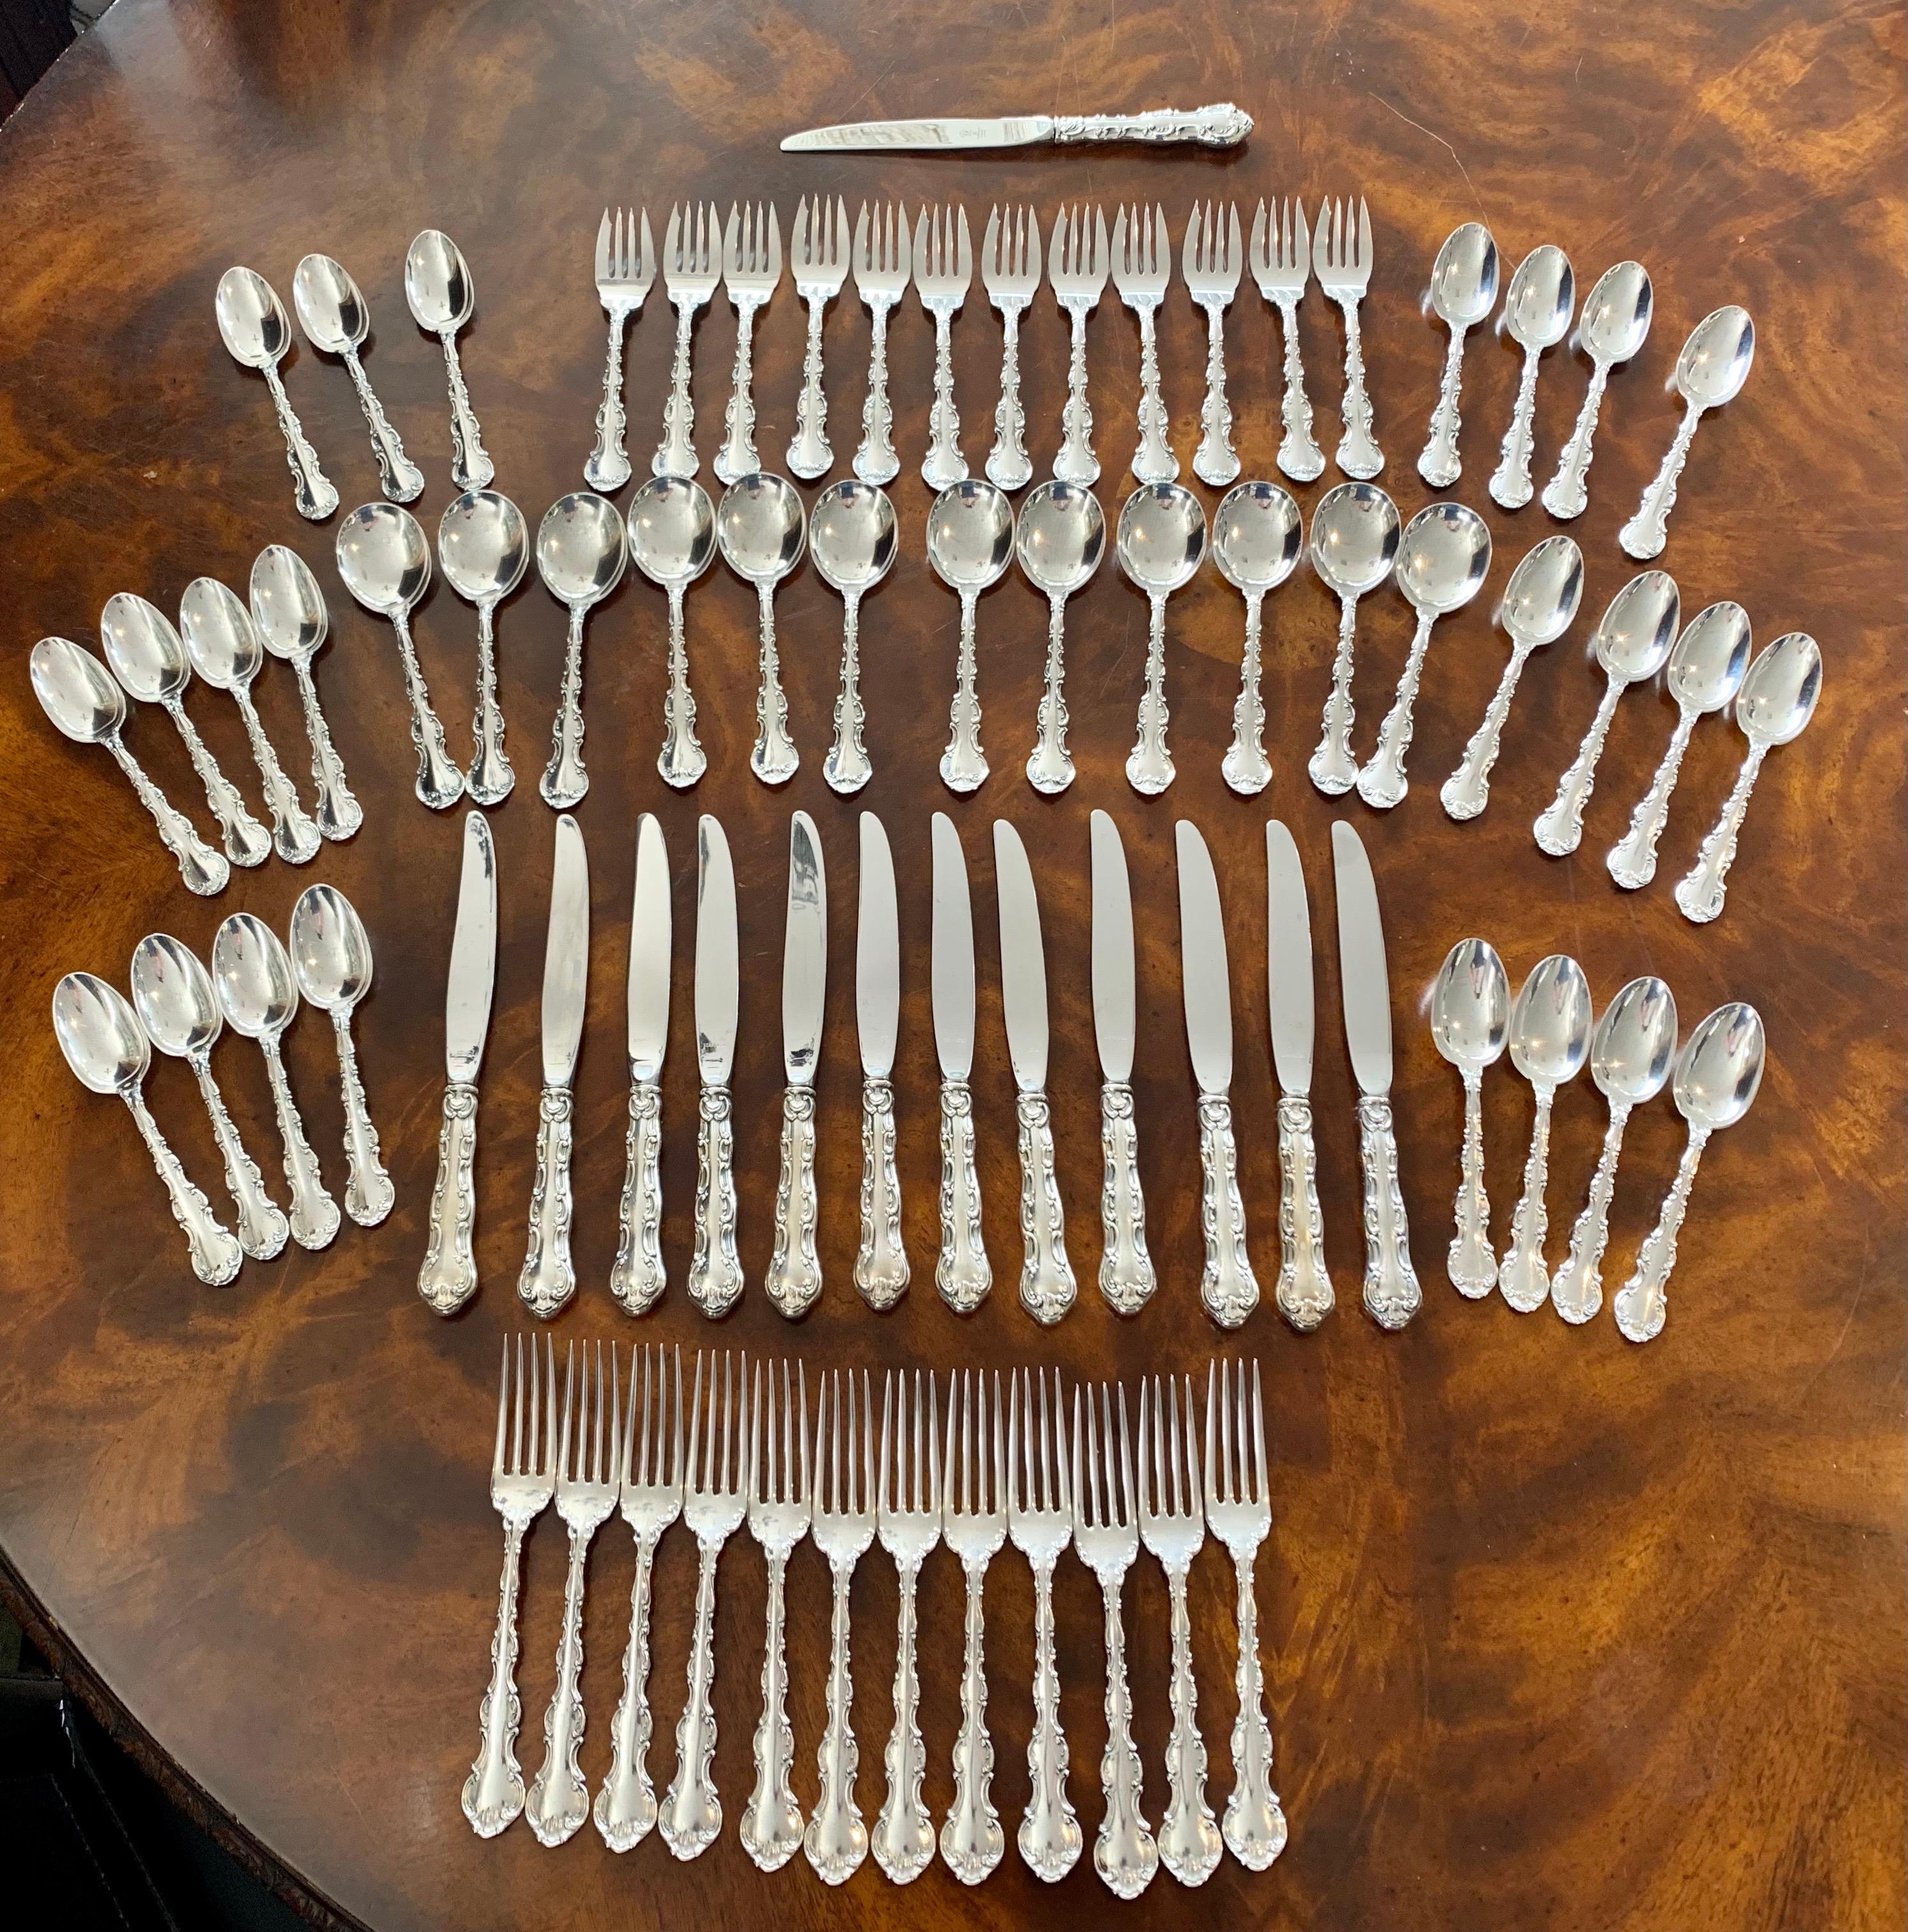 Magnificent Gorham sterling silver flatware set, service for 12 plus additional teaspoons and serving knife to bring total piece count to 72. The style is the coveted Strasbourg. This is a rare set with no monograms. The condition is very good with